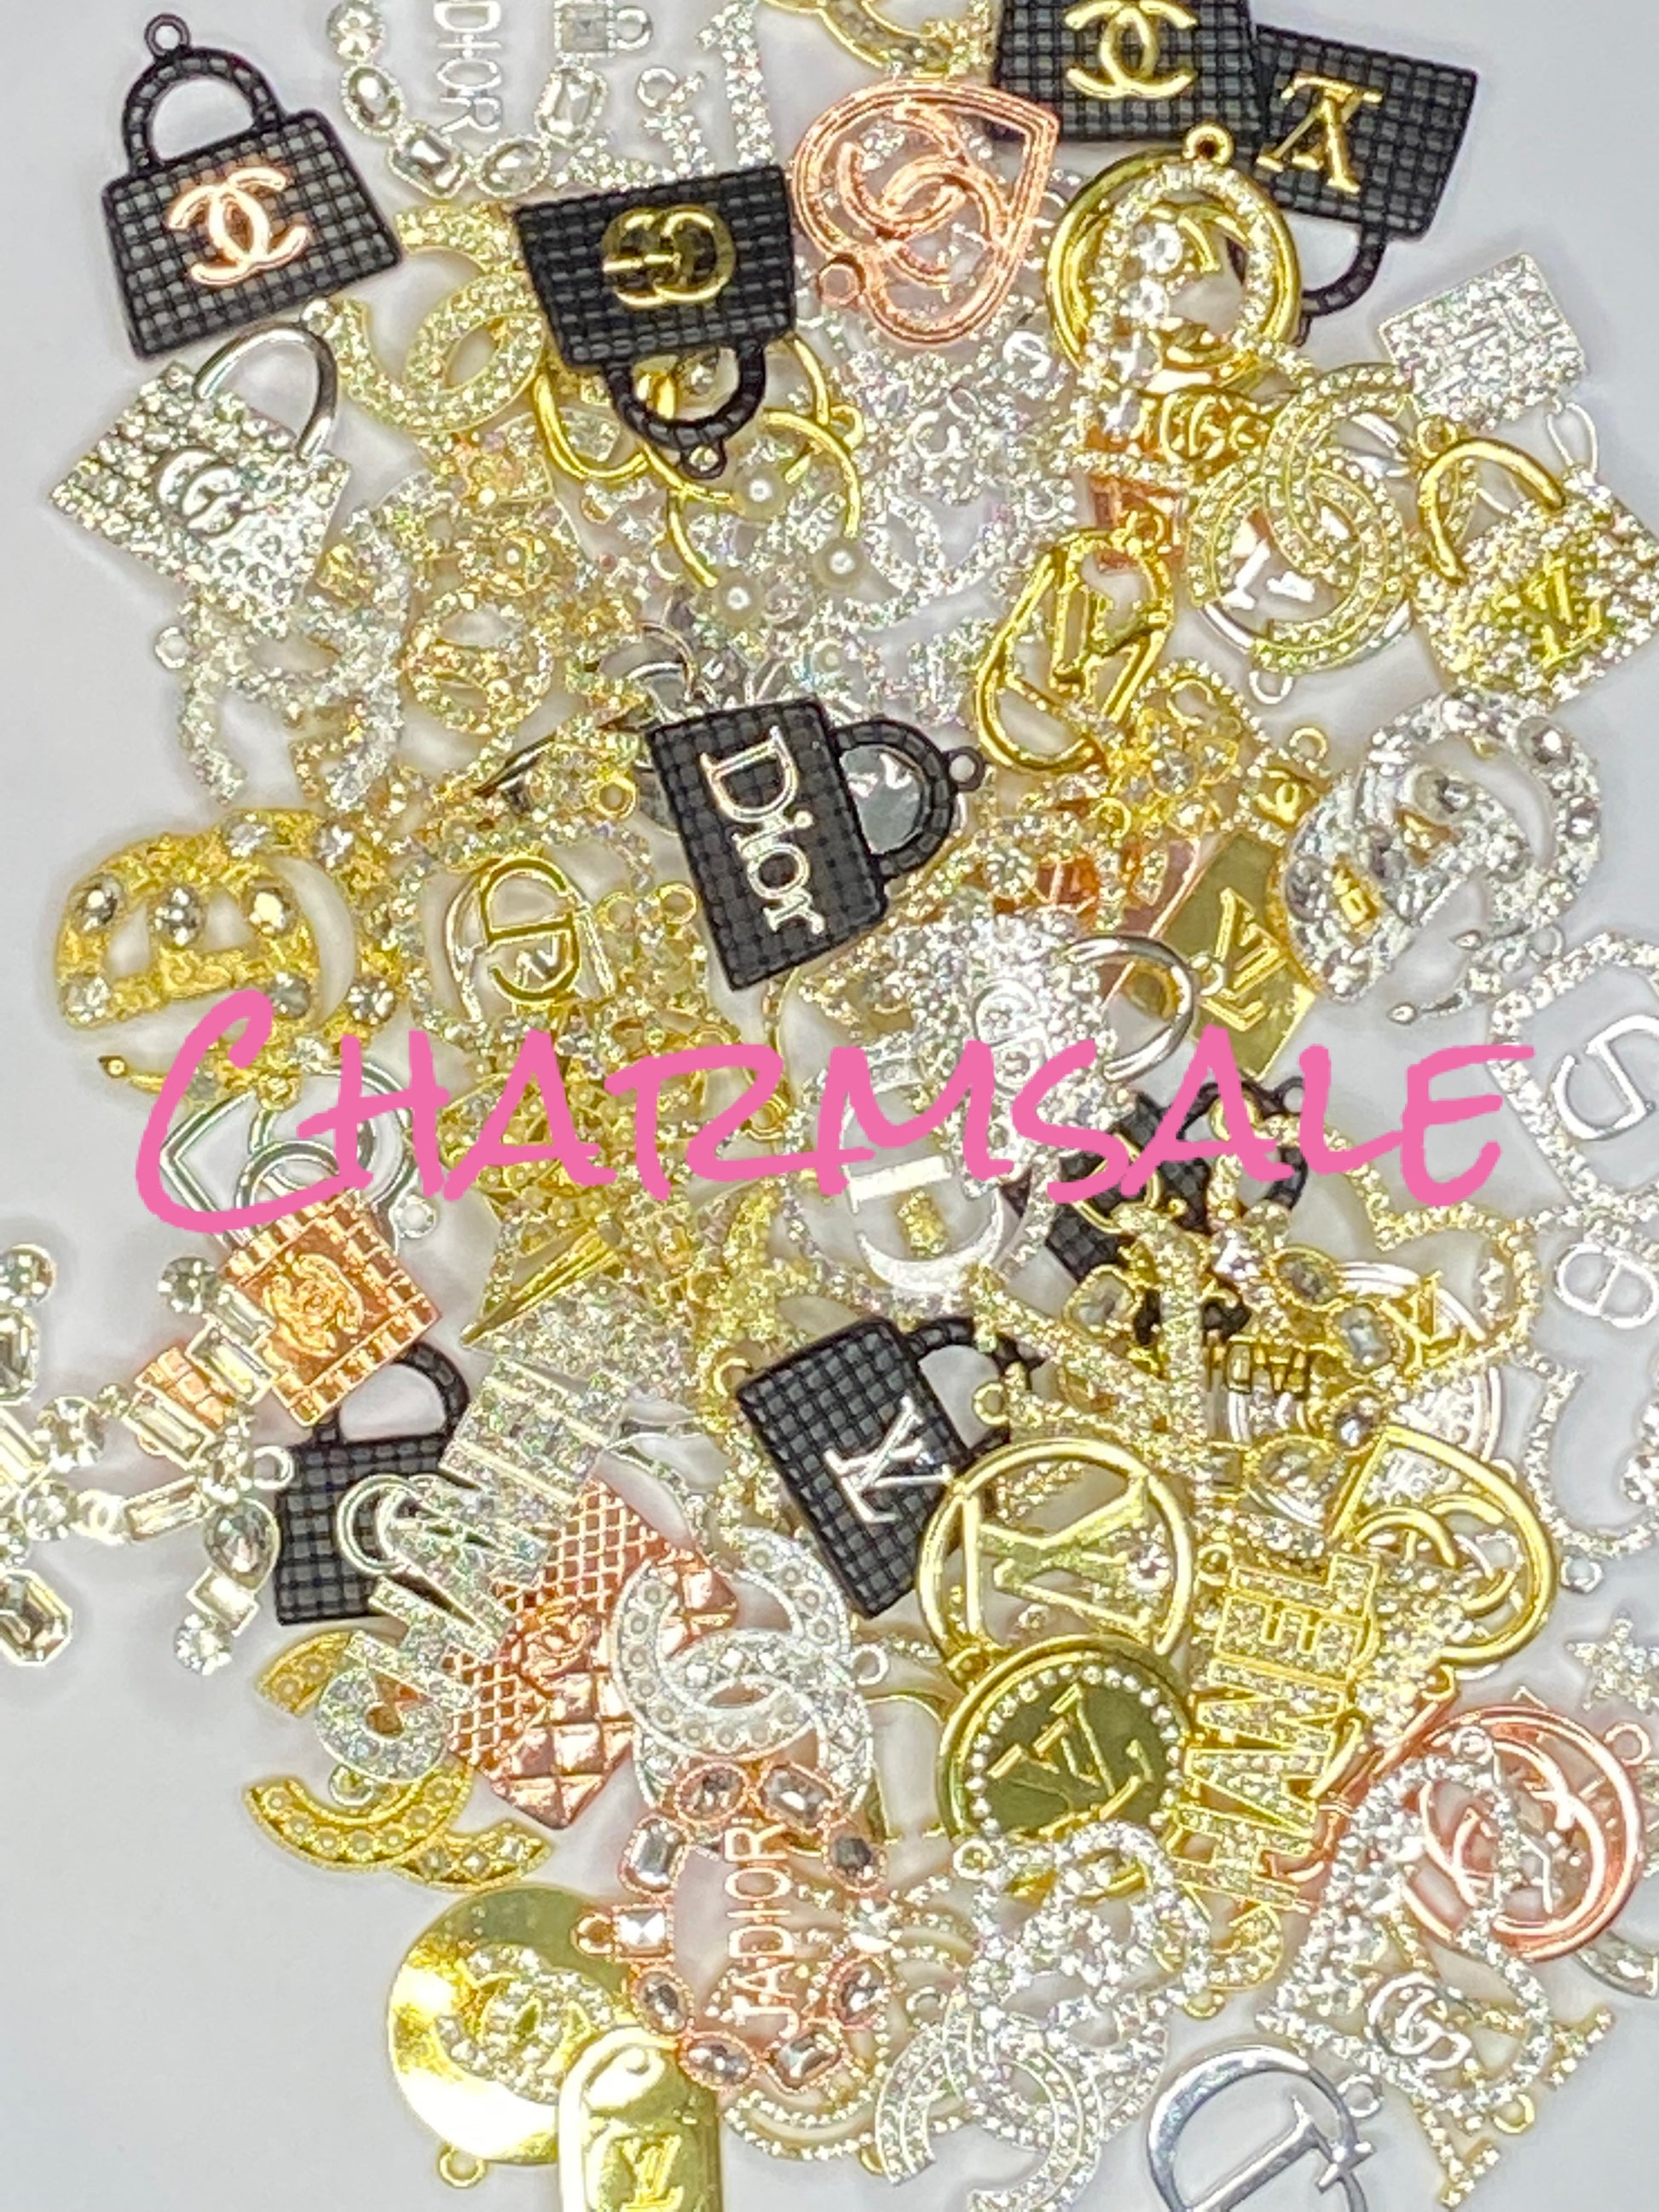 follow @Obcpersonalised to shop! newwwww! design3r charms added. fi